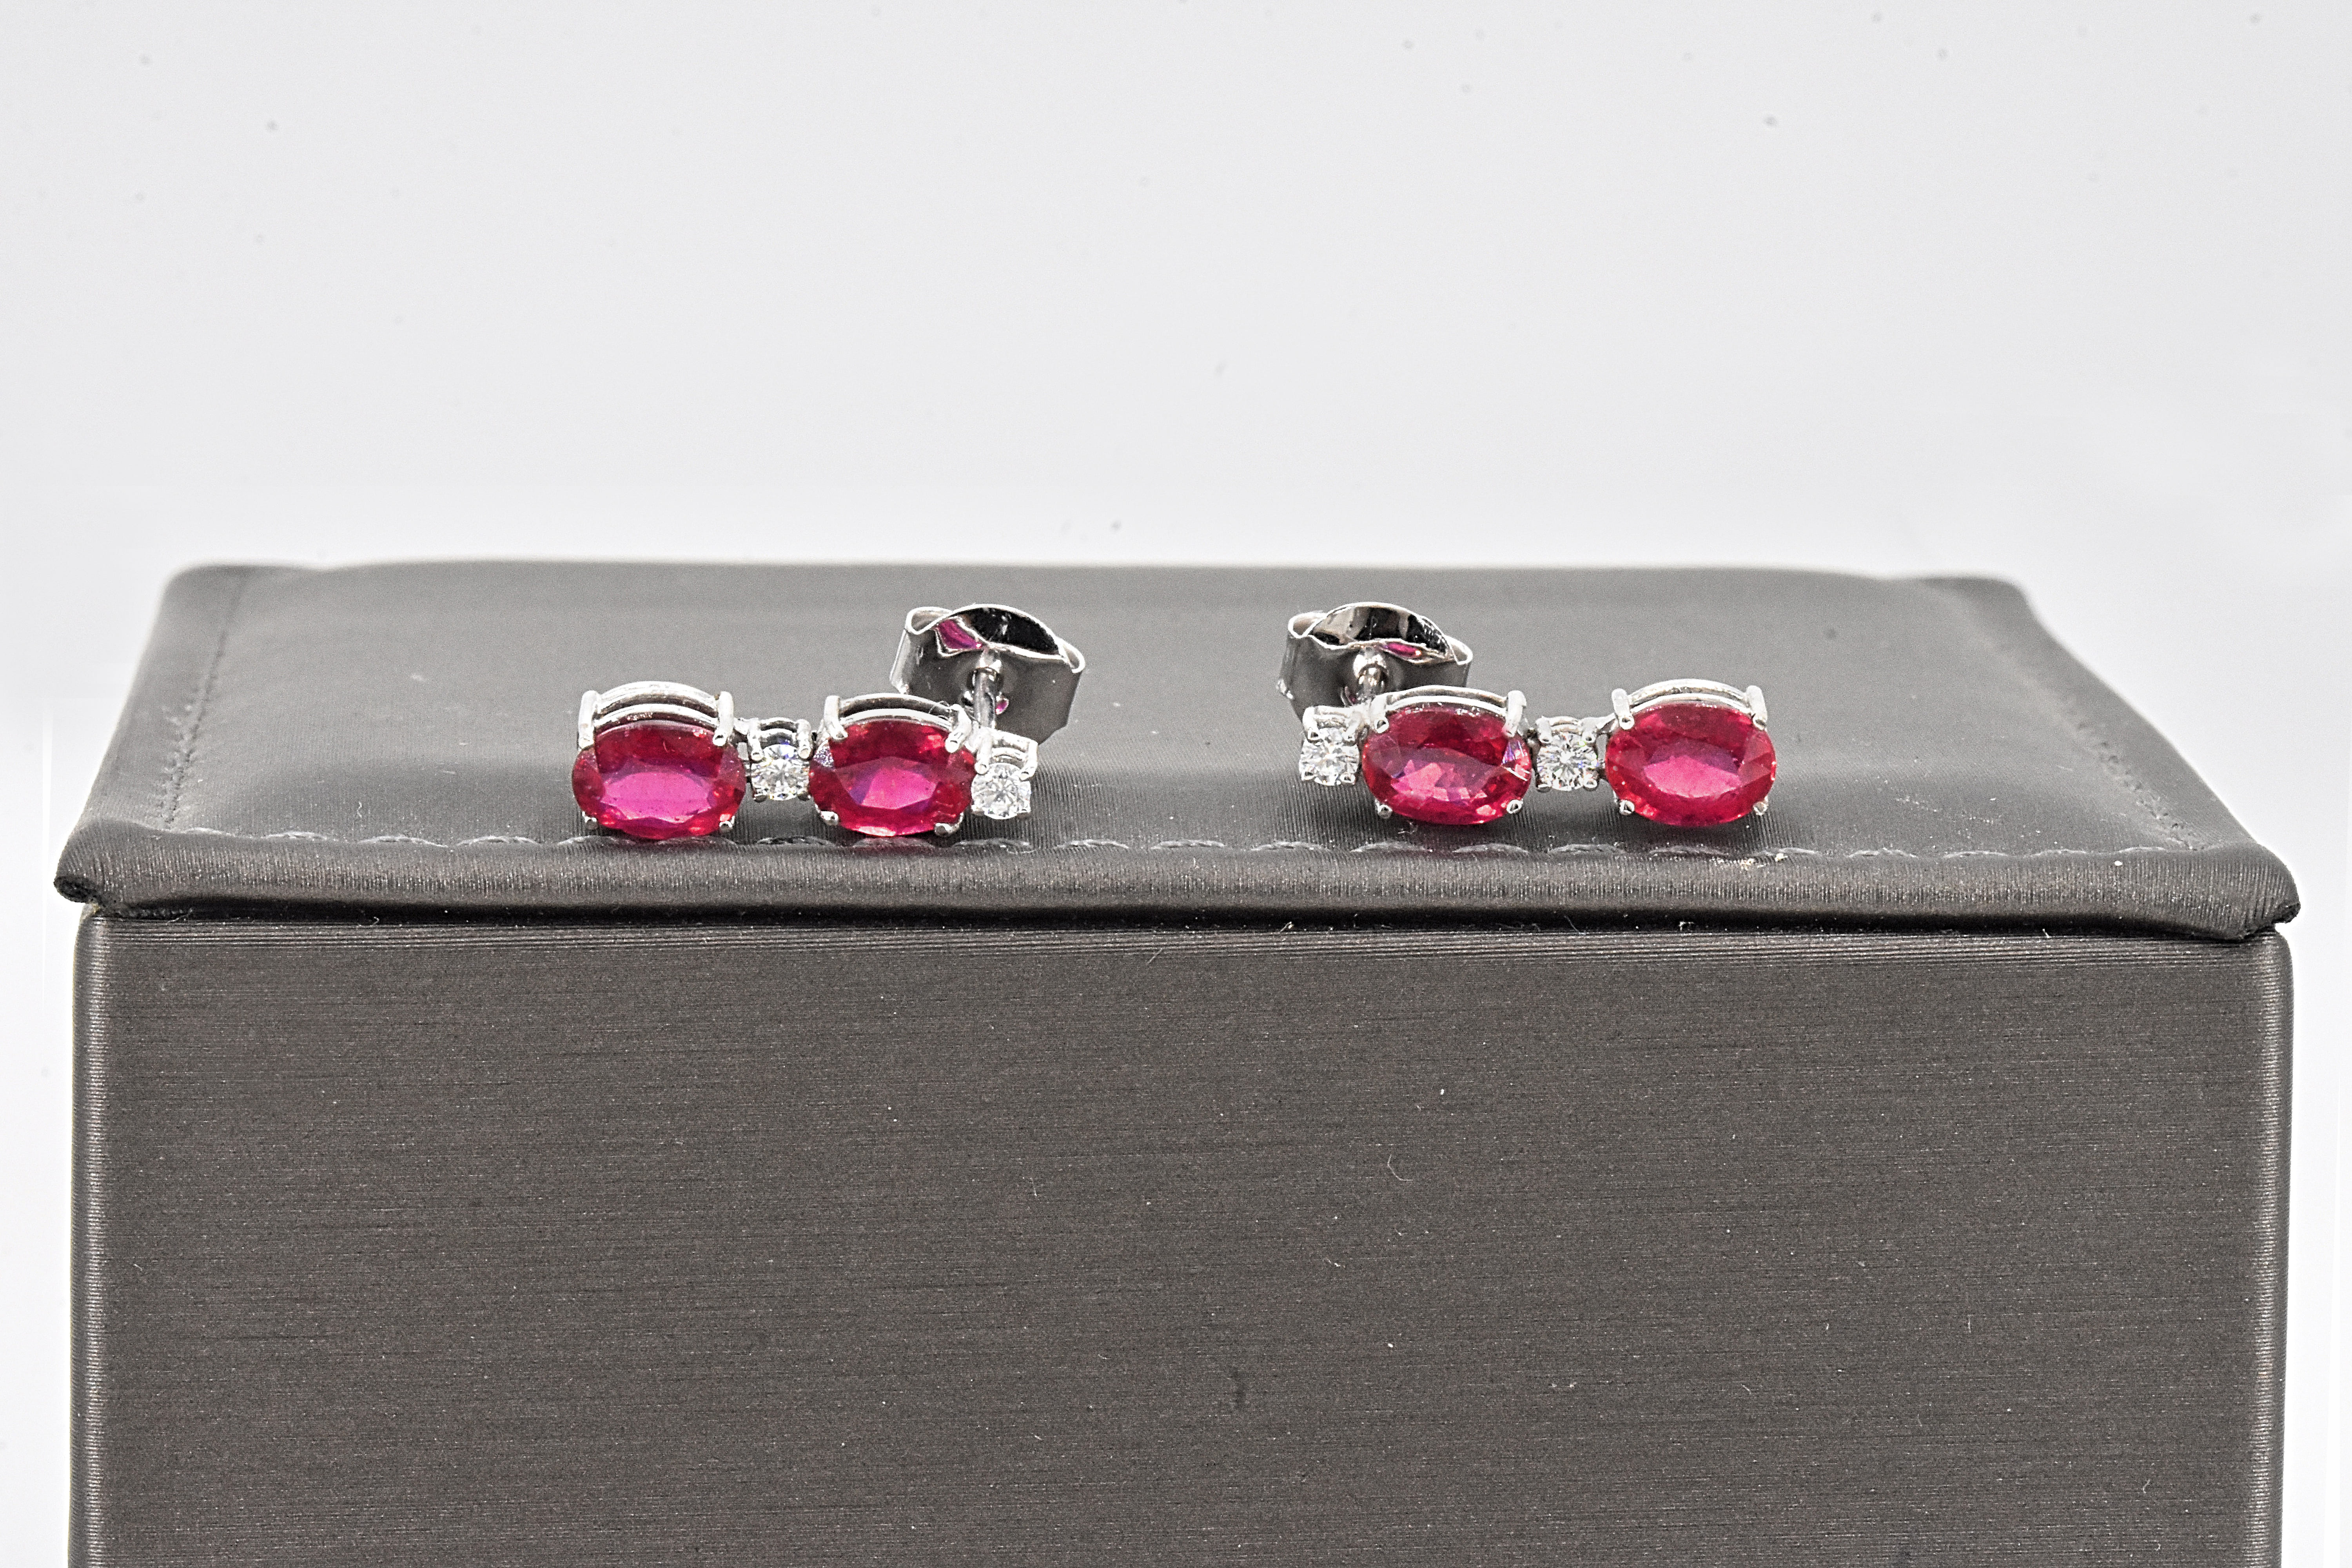 Earrings - 4.65 ct Ruby - Diamonds - NO RESERVE price! - Image 6 of 6